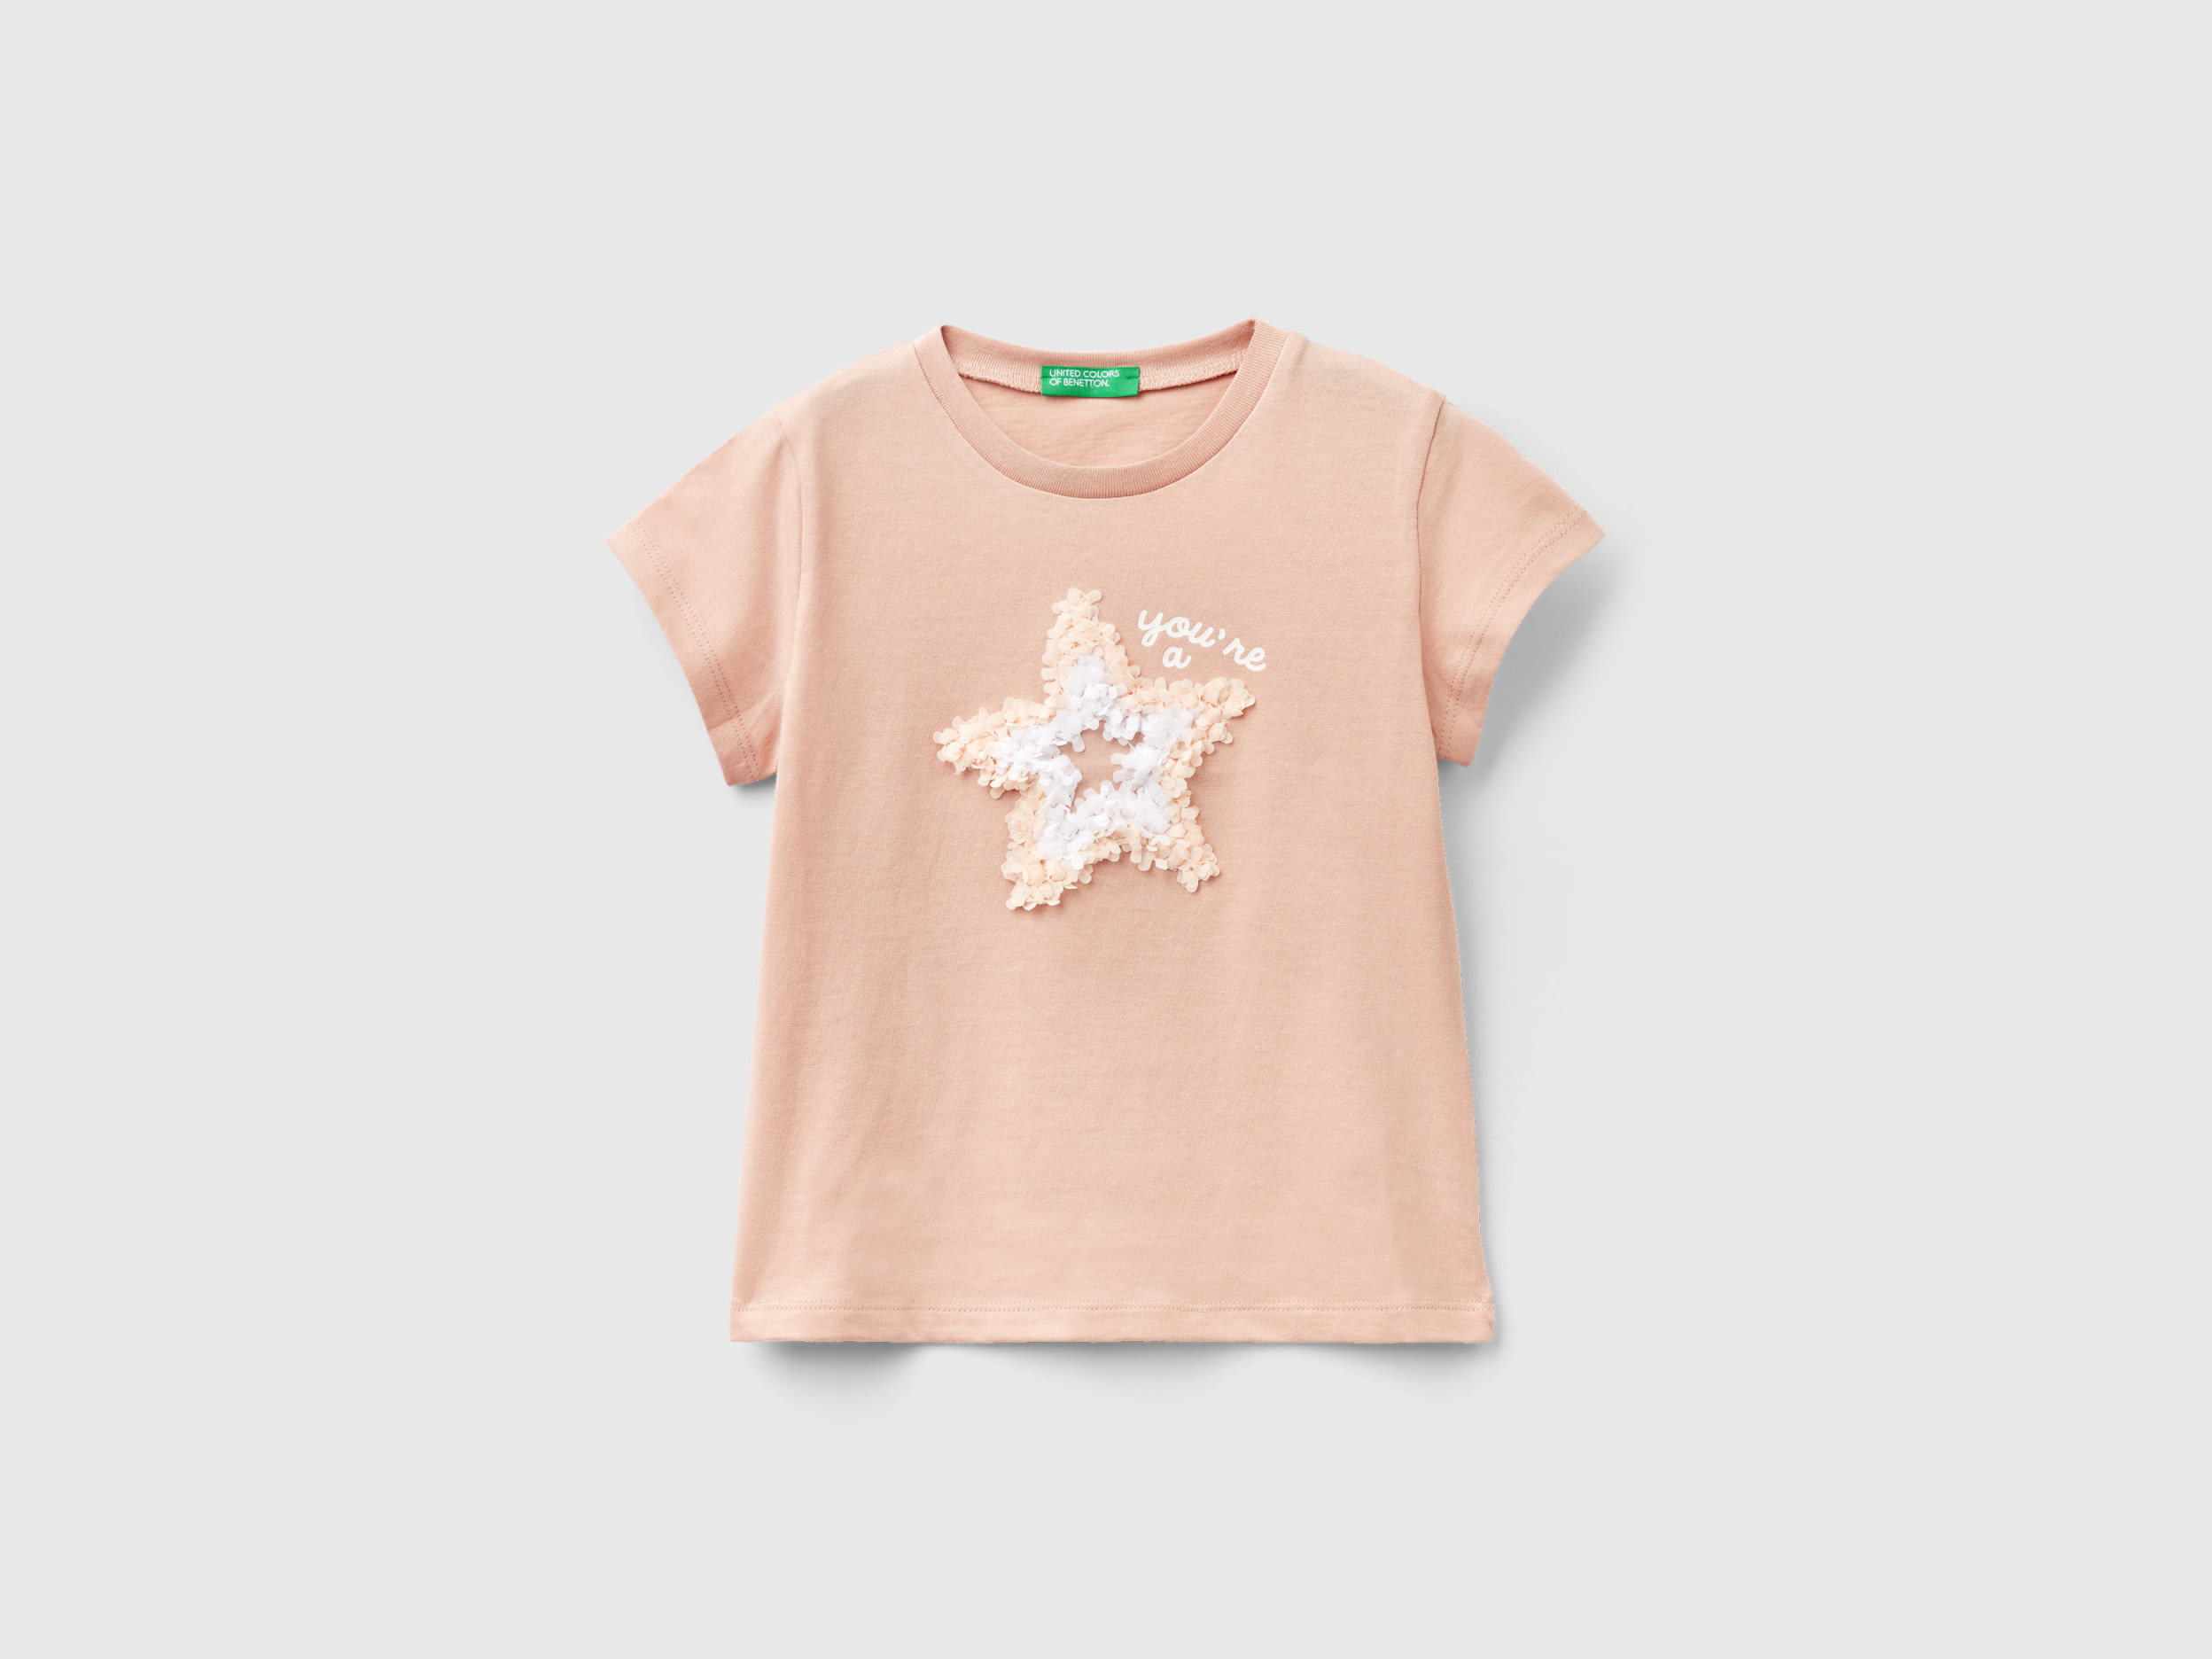 Image of Benetton, T-shirt With Petal Effect Applique, size 90, Soft Pink, Kids